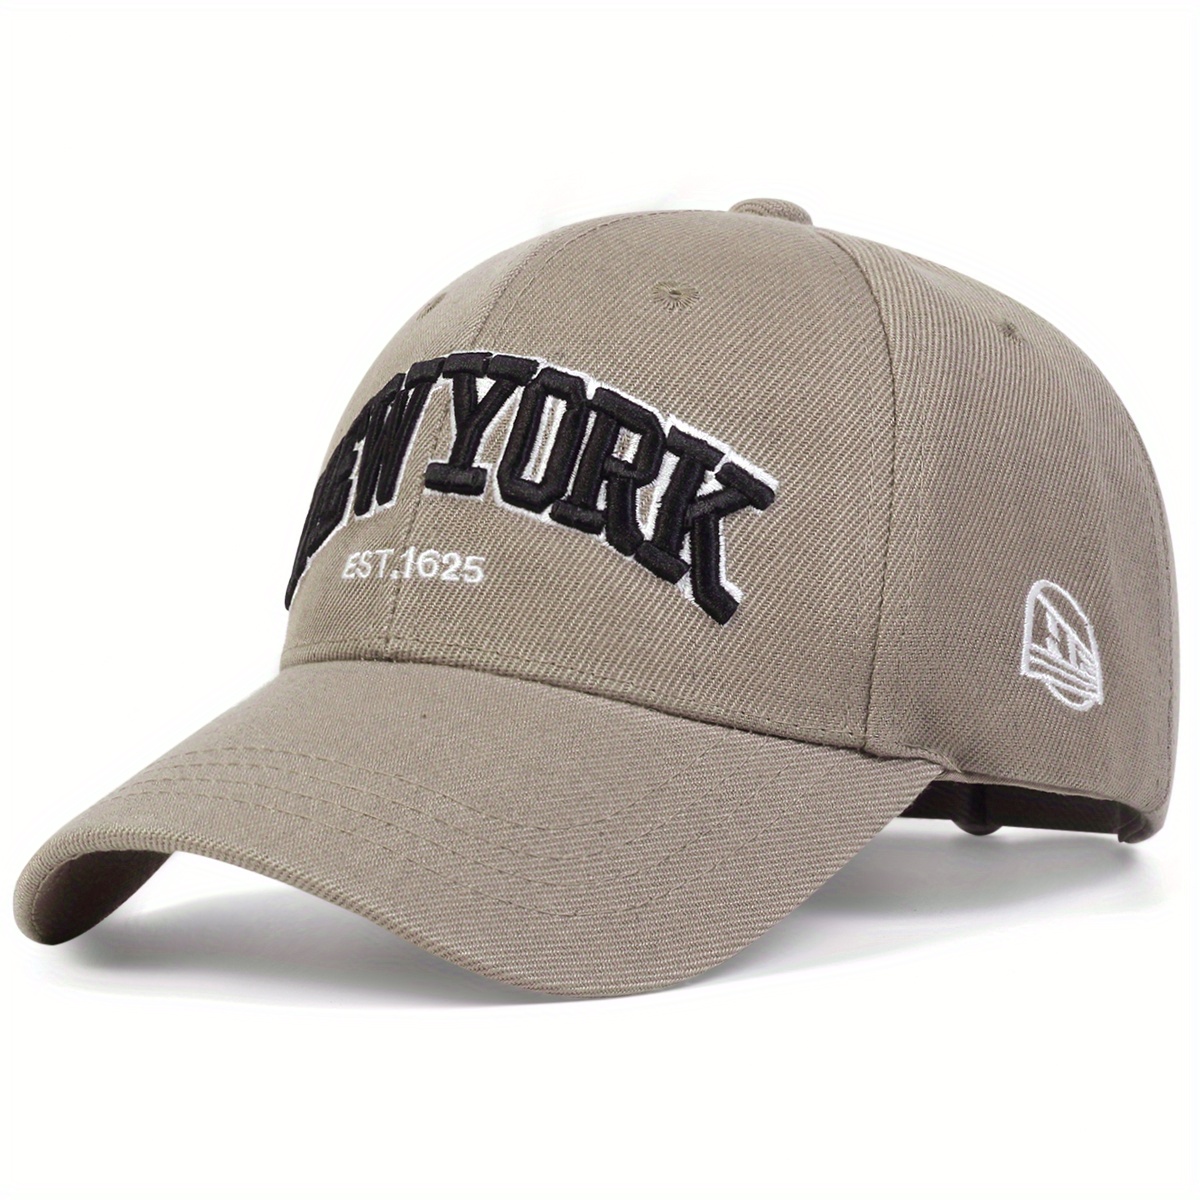  New York Yankees Mlb Fitted Cap : Sports & Outdoors